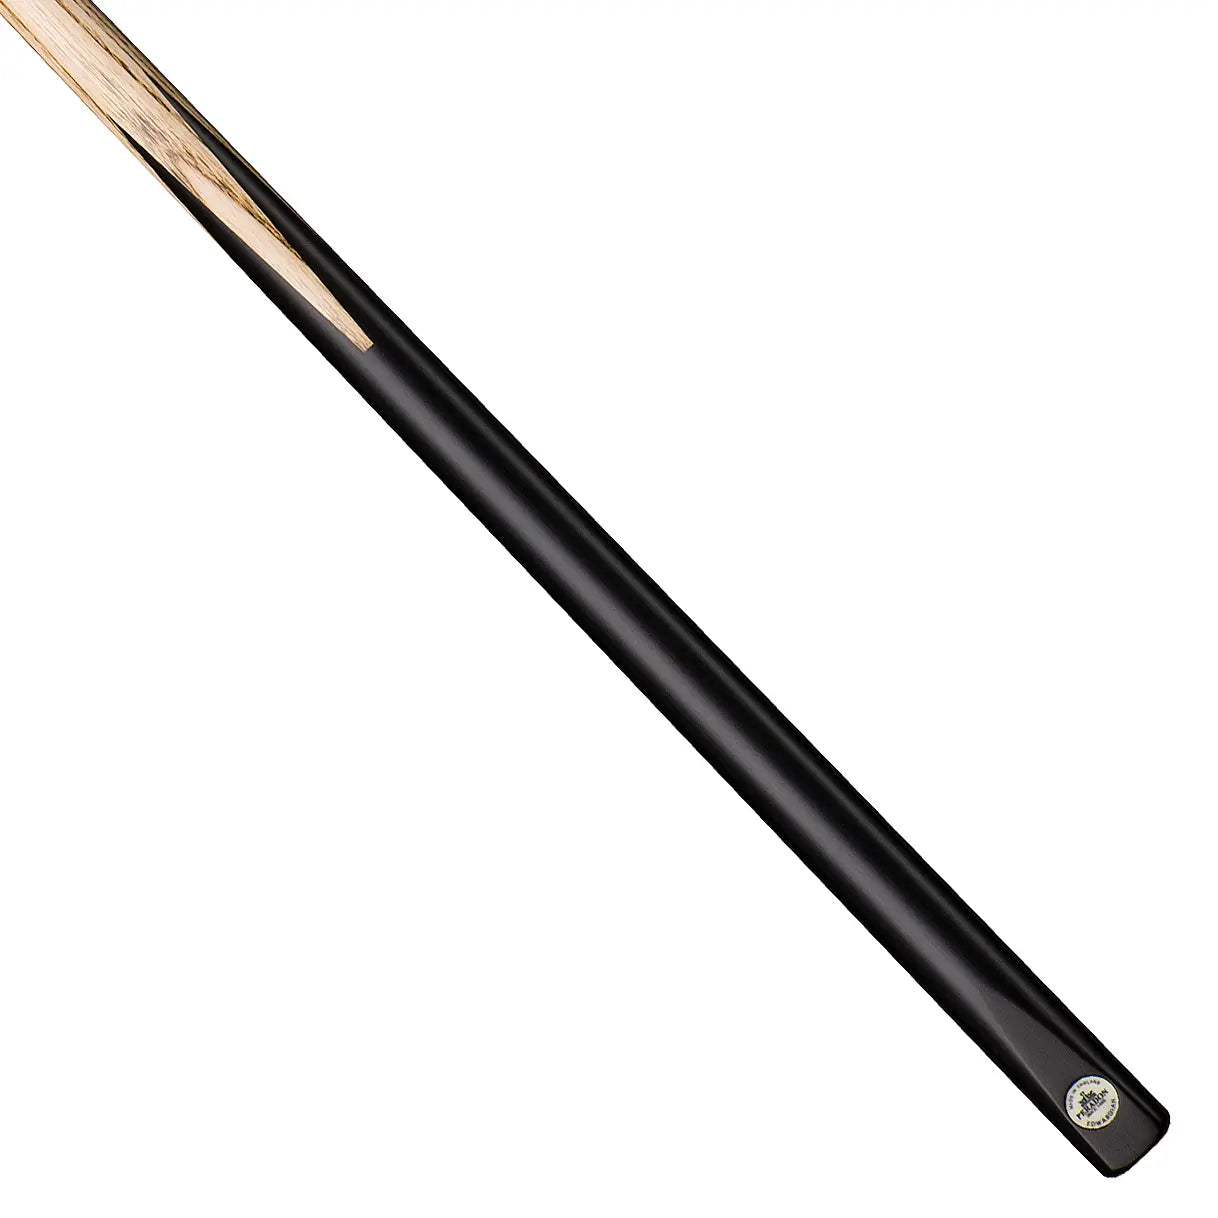 Peradon Edwardian One Piece Snooker Cue. On angle view